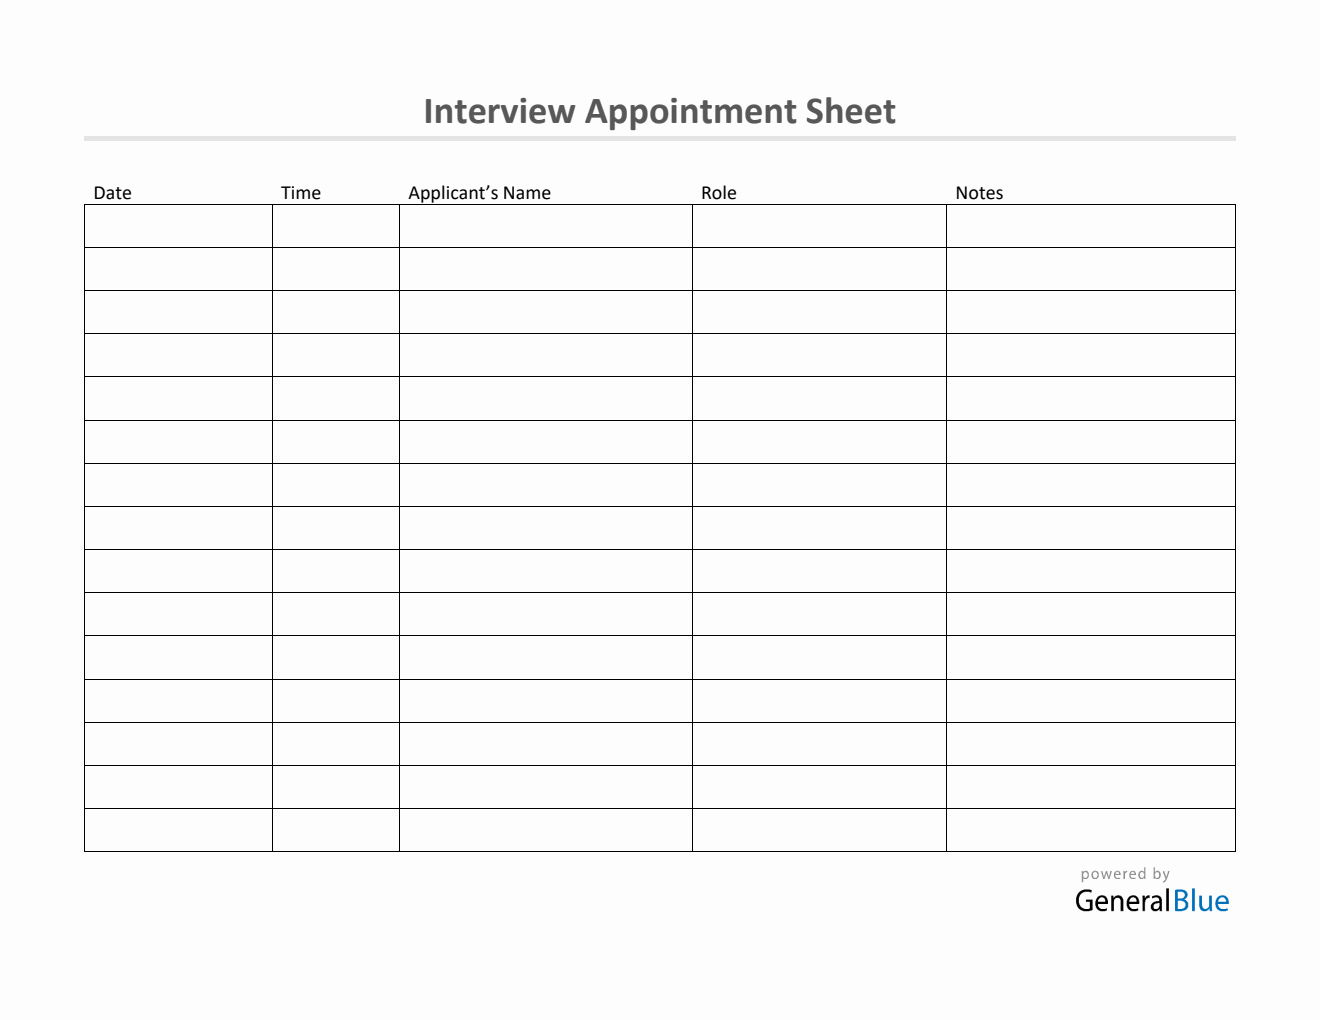 Interview Appointment Sheet Template in PDF (Basic)